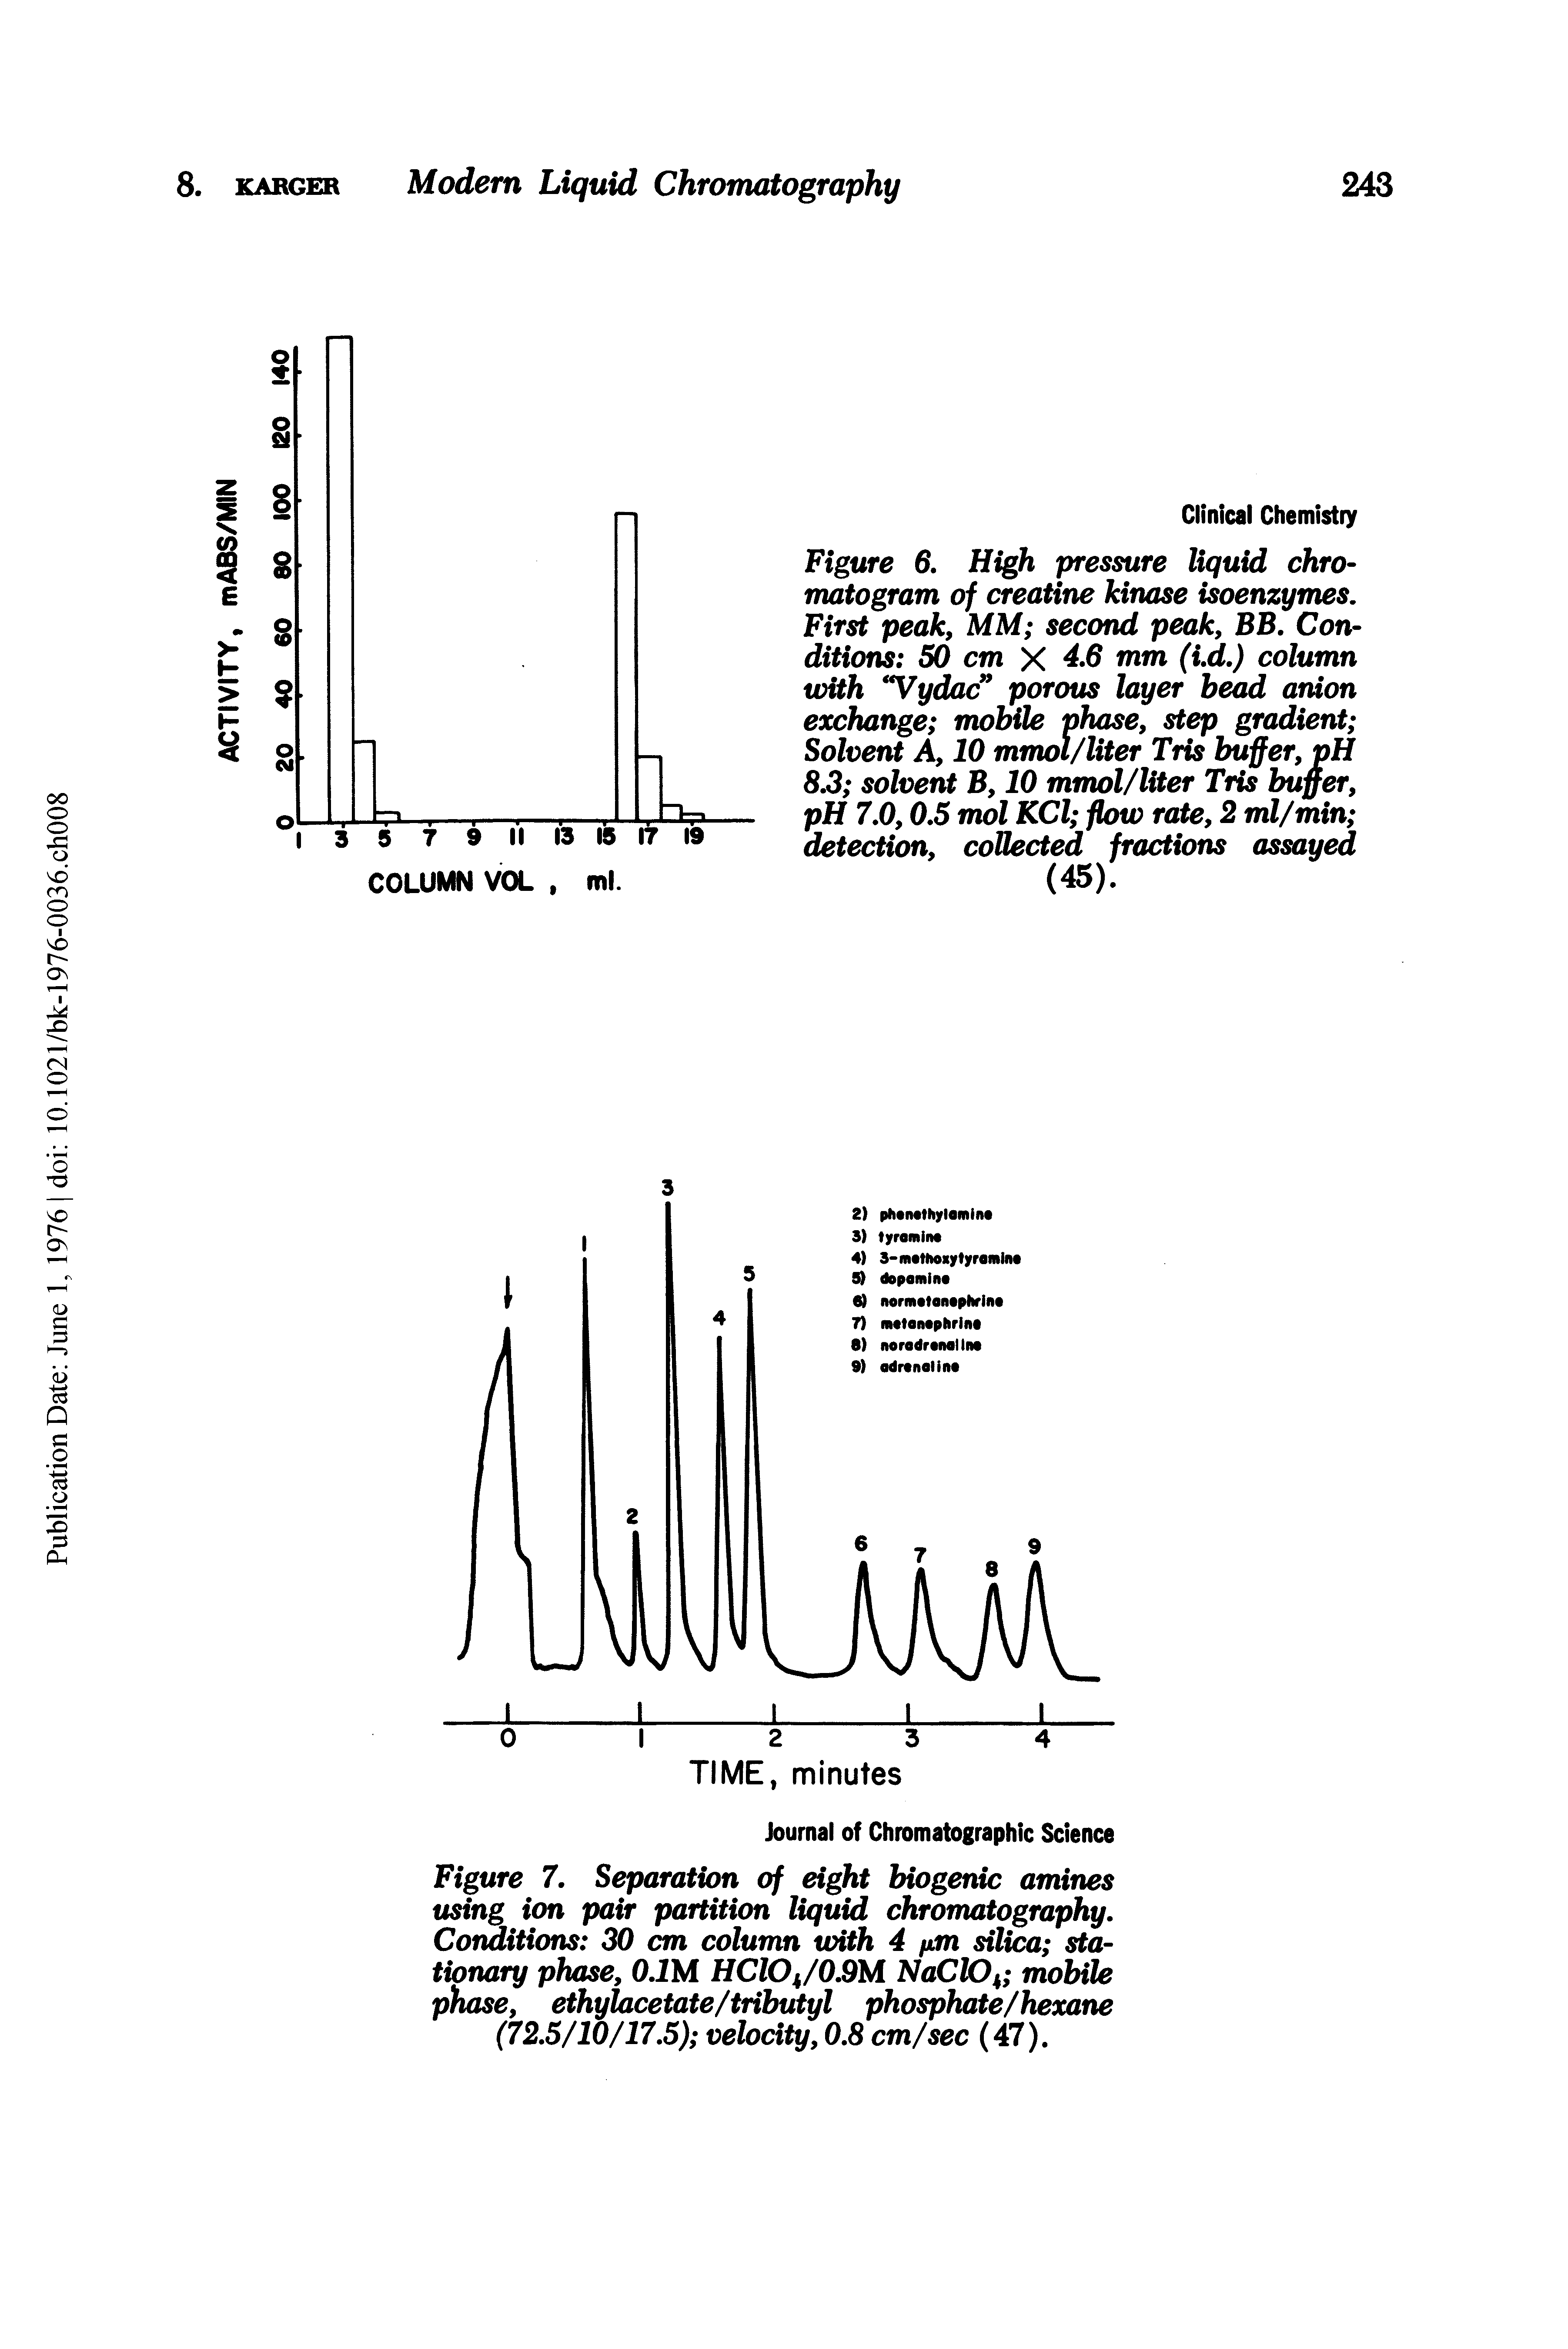 Figure 6, High pressure liquid chromatogram of creatine kinase isoenzymes. First peak, MM second peak, BB. Conditions 50 cm X 4.8 mm (i.d.) column with yydac porous layer bead anion exchange mobile phase, step gradient Solvent A, 10 mmol/liter Tris buffer, pH 8.3 solvent B, 10 mmol/liter Tris buffer, pH 7.0,0.5 mol KCl flow rate, 2 ml/min detection, collected fractions assayed (45).